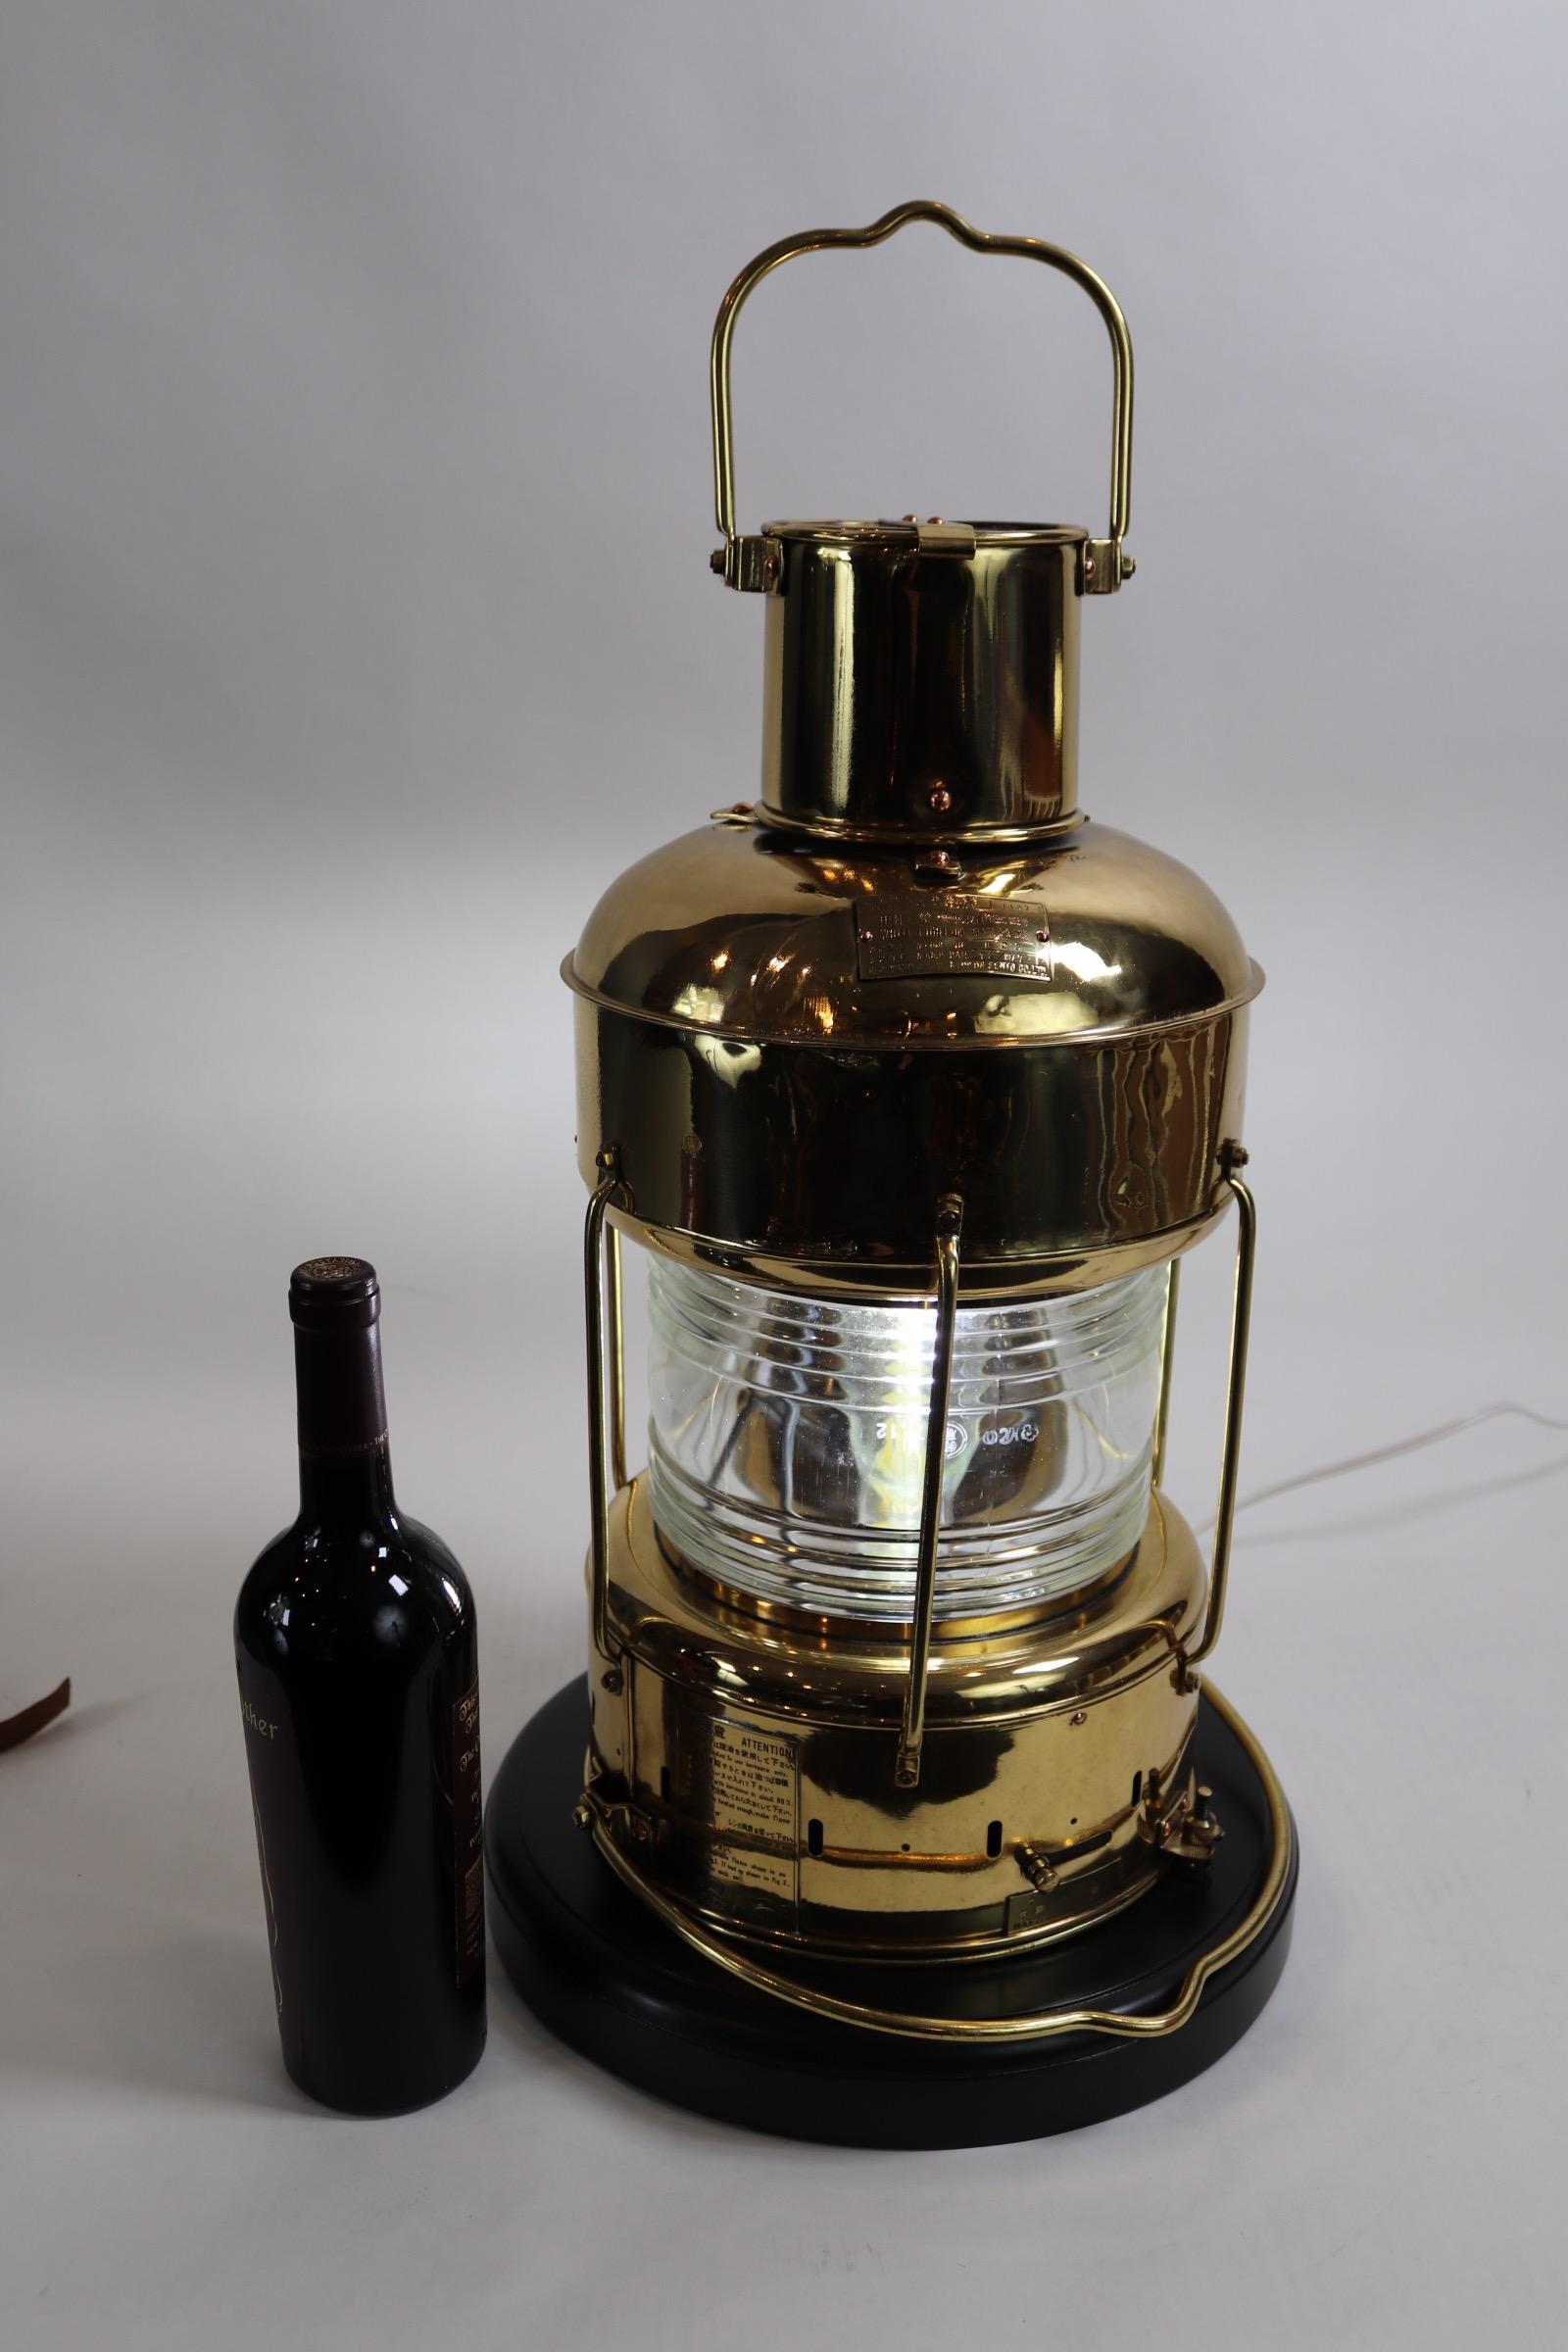 Solid brass highly polished and lacquered ships anchor lantern with Fresnel glass lens. Mounted to a wood base with rich dark finish. With brass makers plate from Japanese manufacturer Nippon Sento. Made in 1977. Lantern has been wired for home